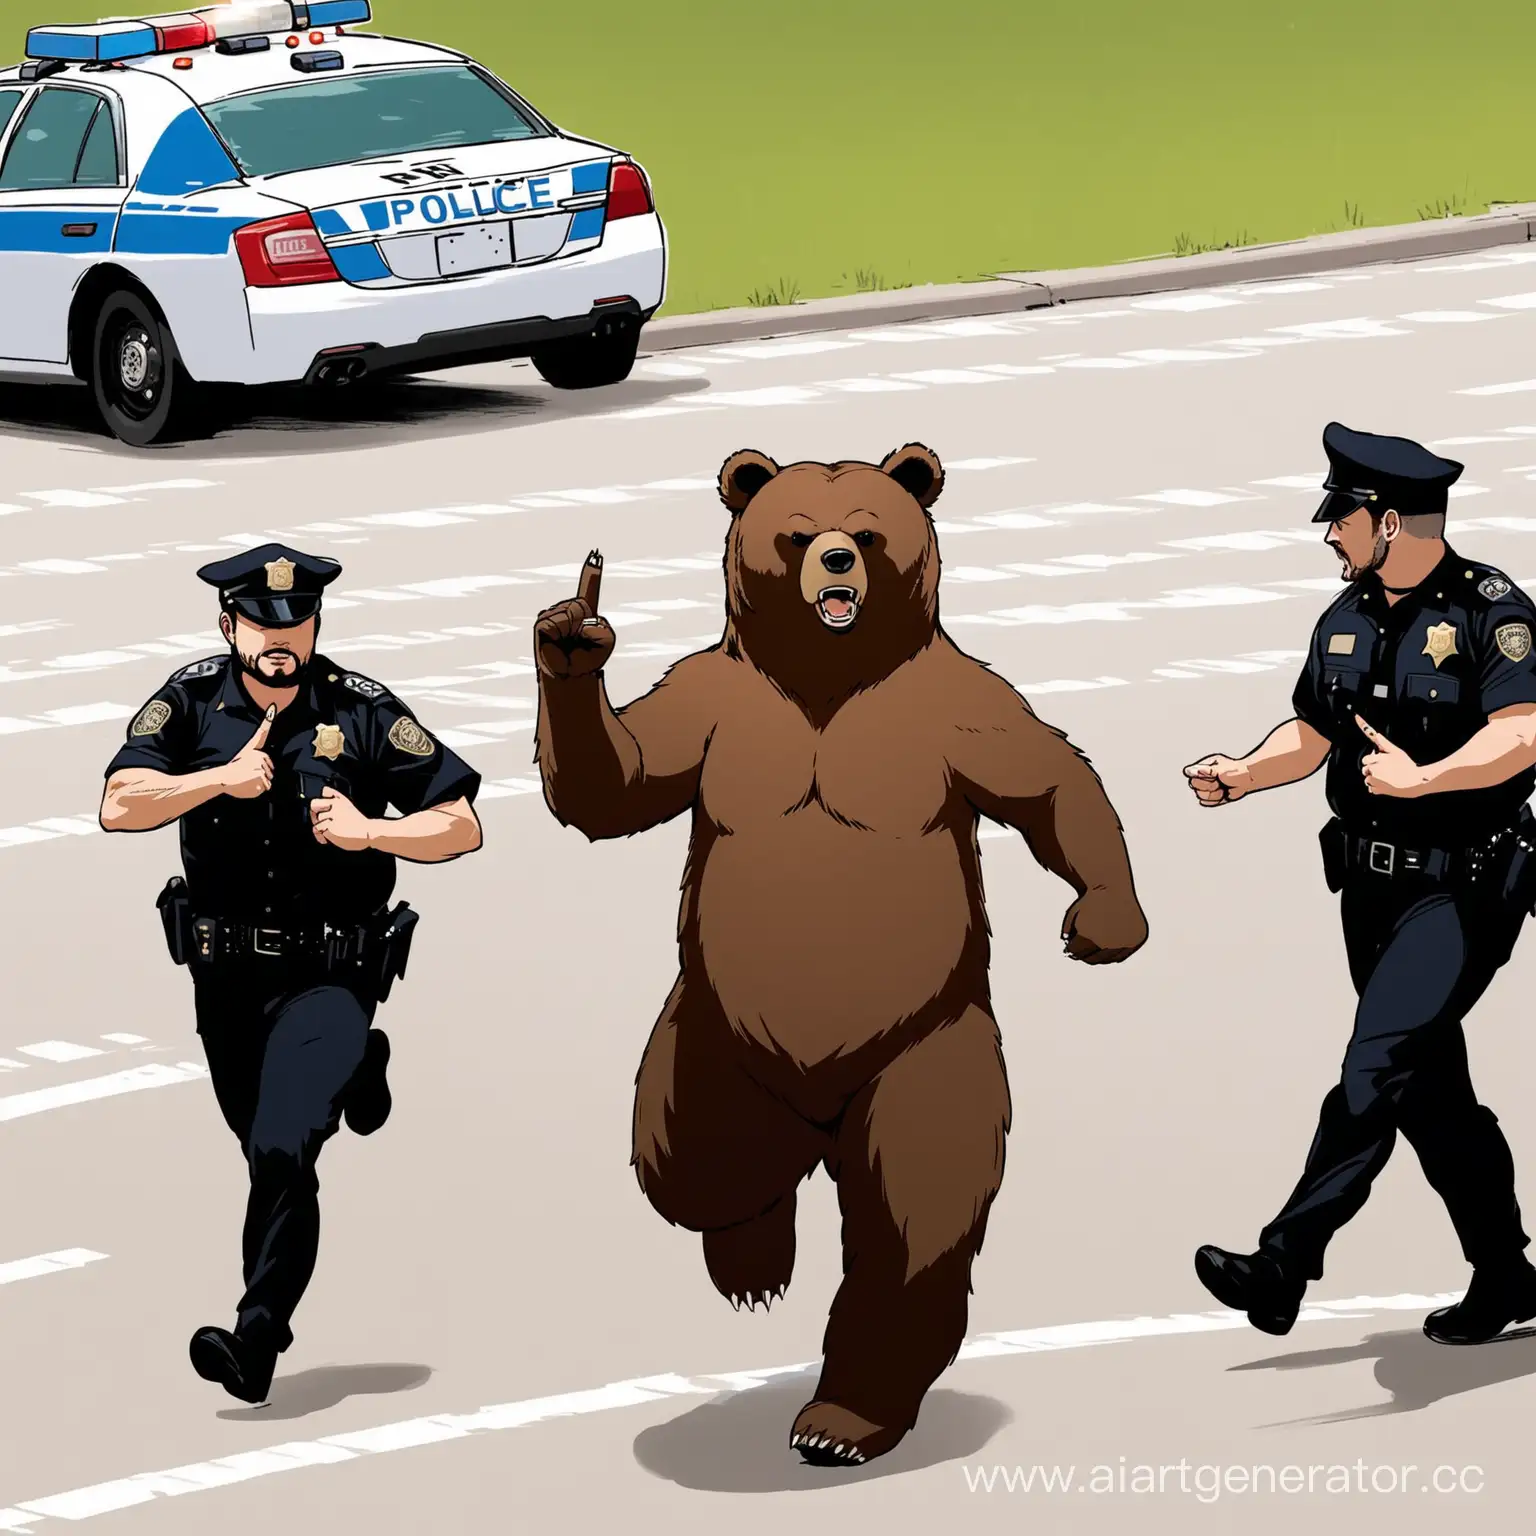 Rebellious-Bear-Escapes-Police-Chase